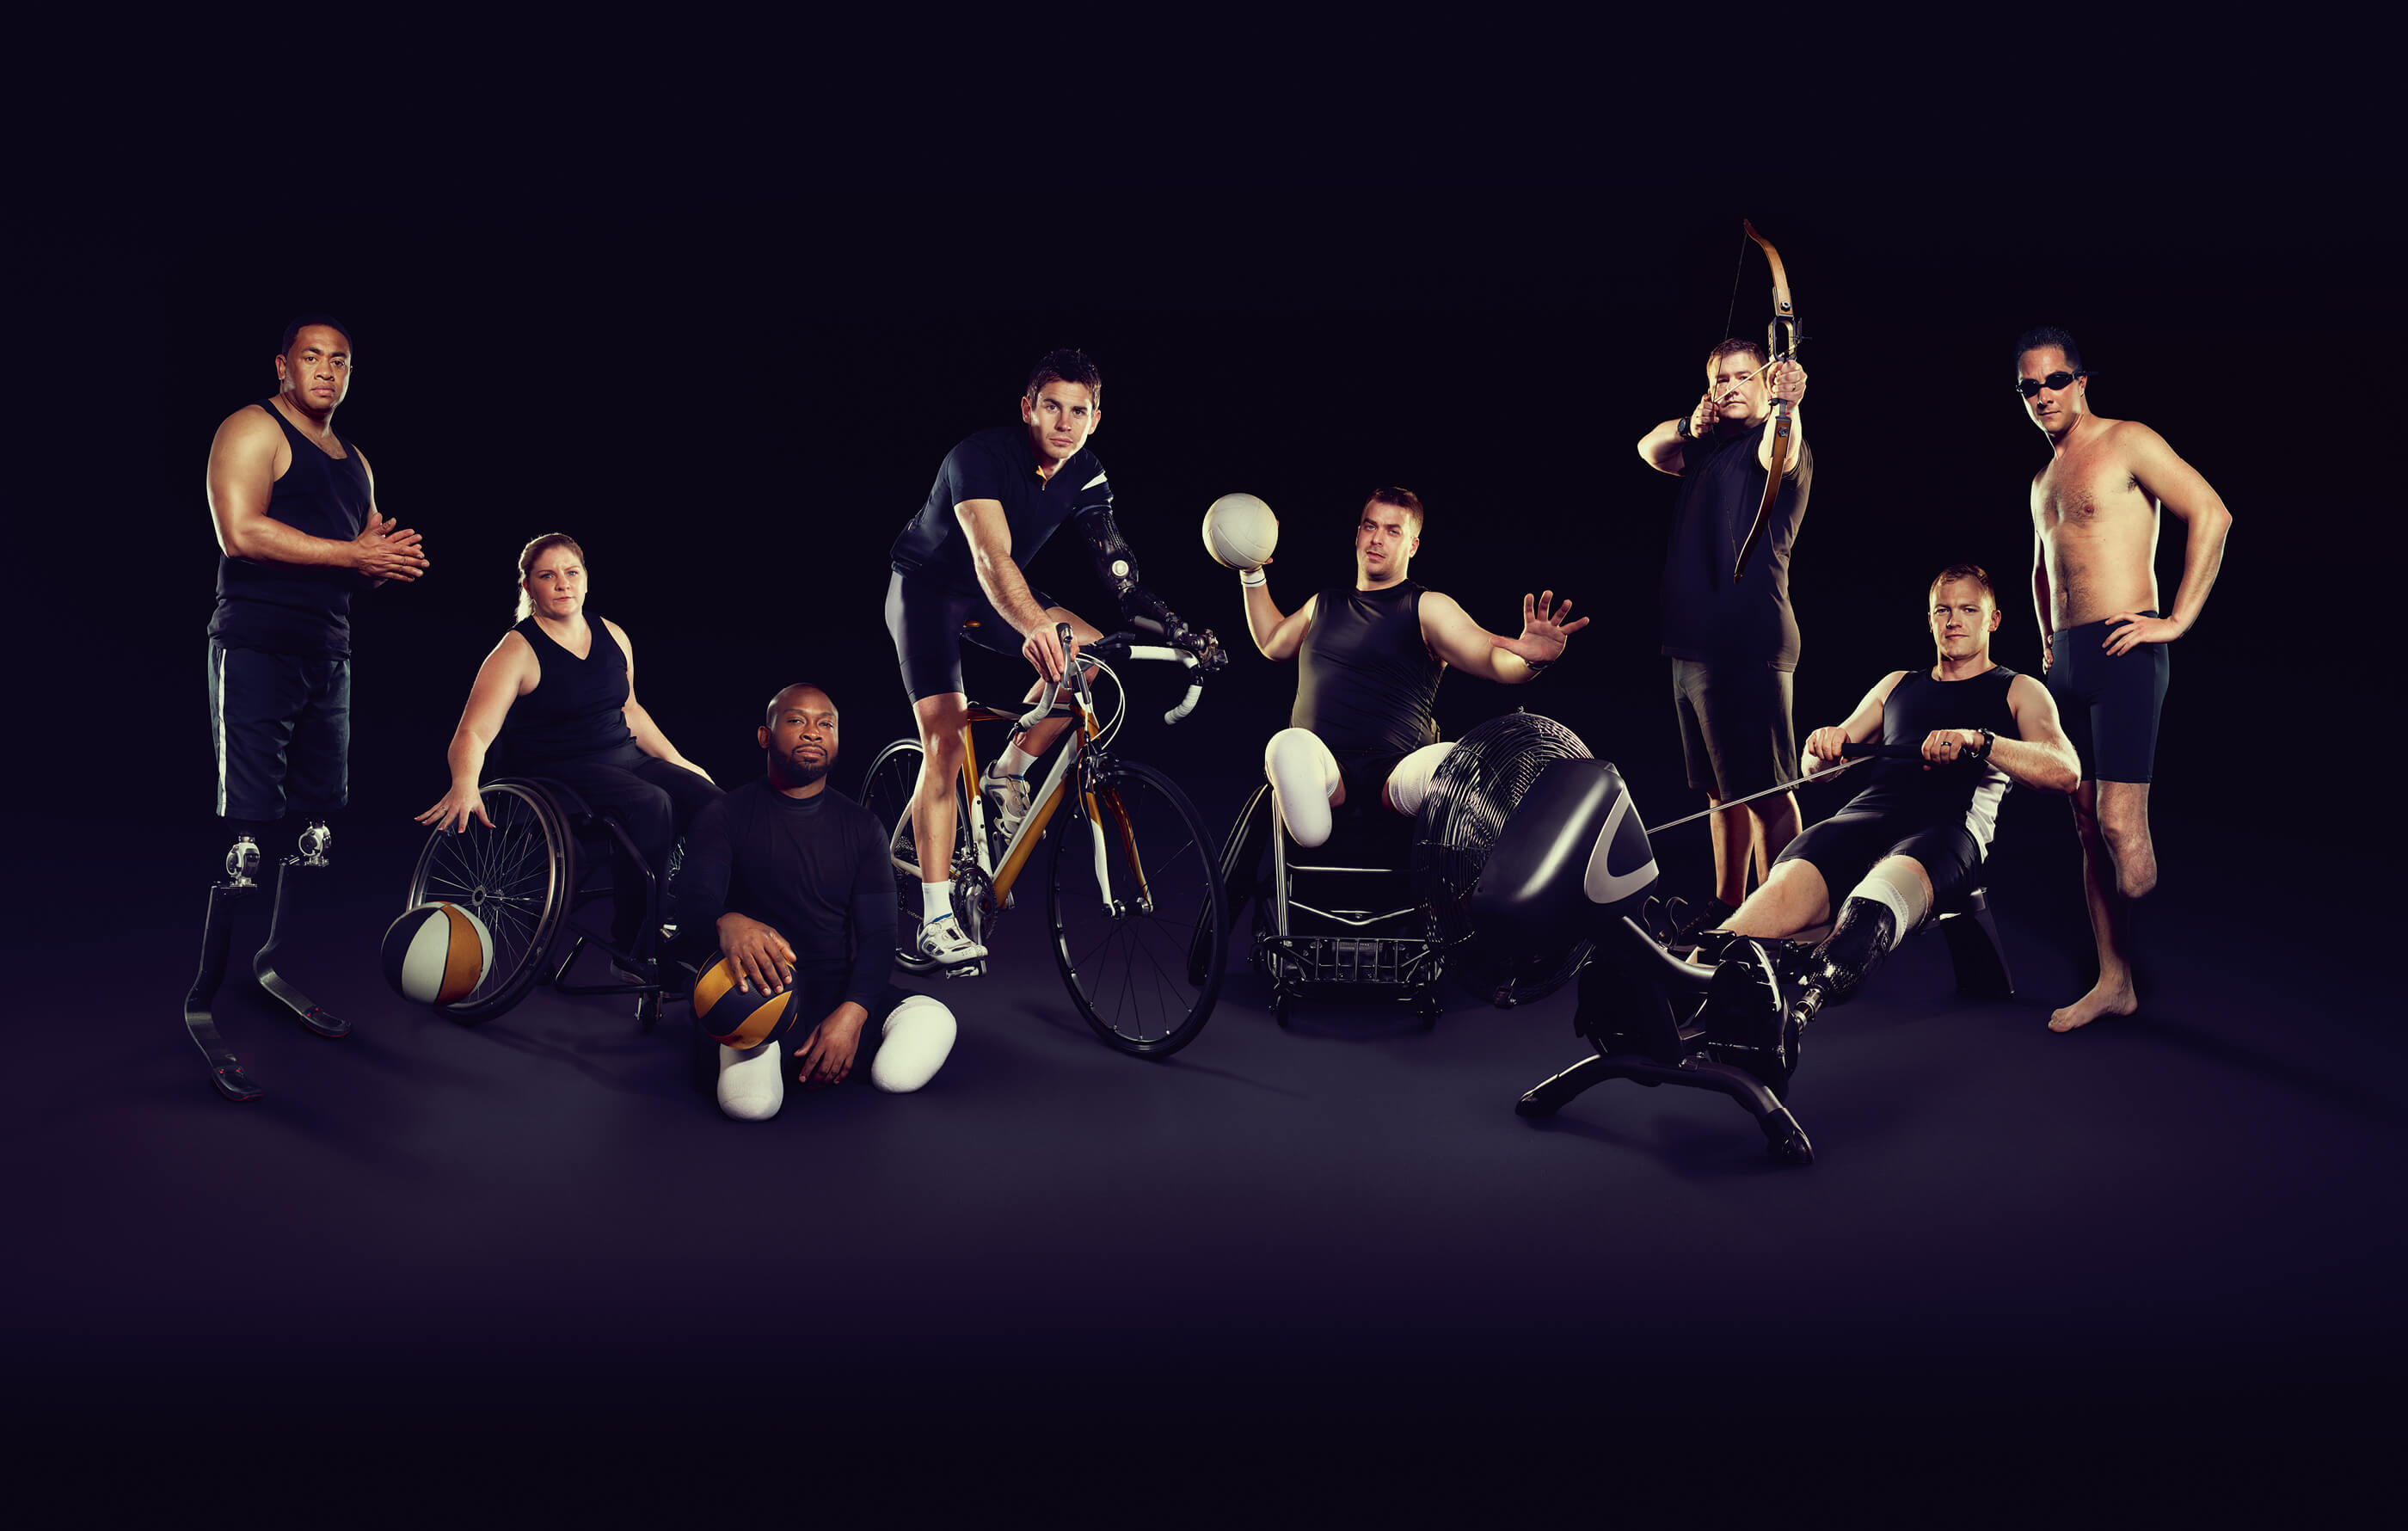 Full screen image of the Invictus Games participants from 8 sport disciplines – including running, basketball, archery and cycling – on a black background